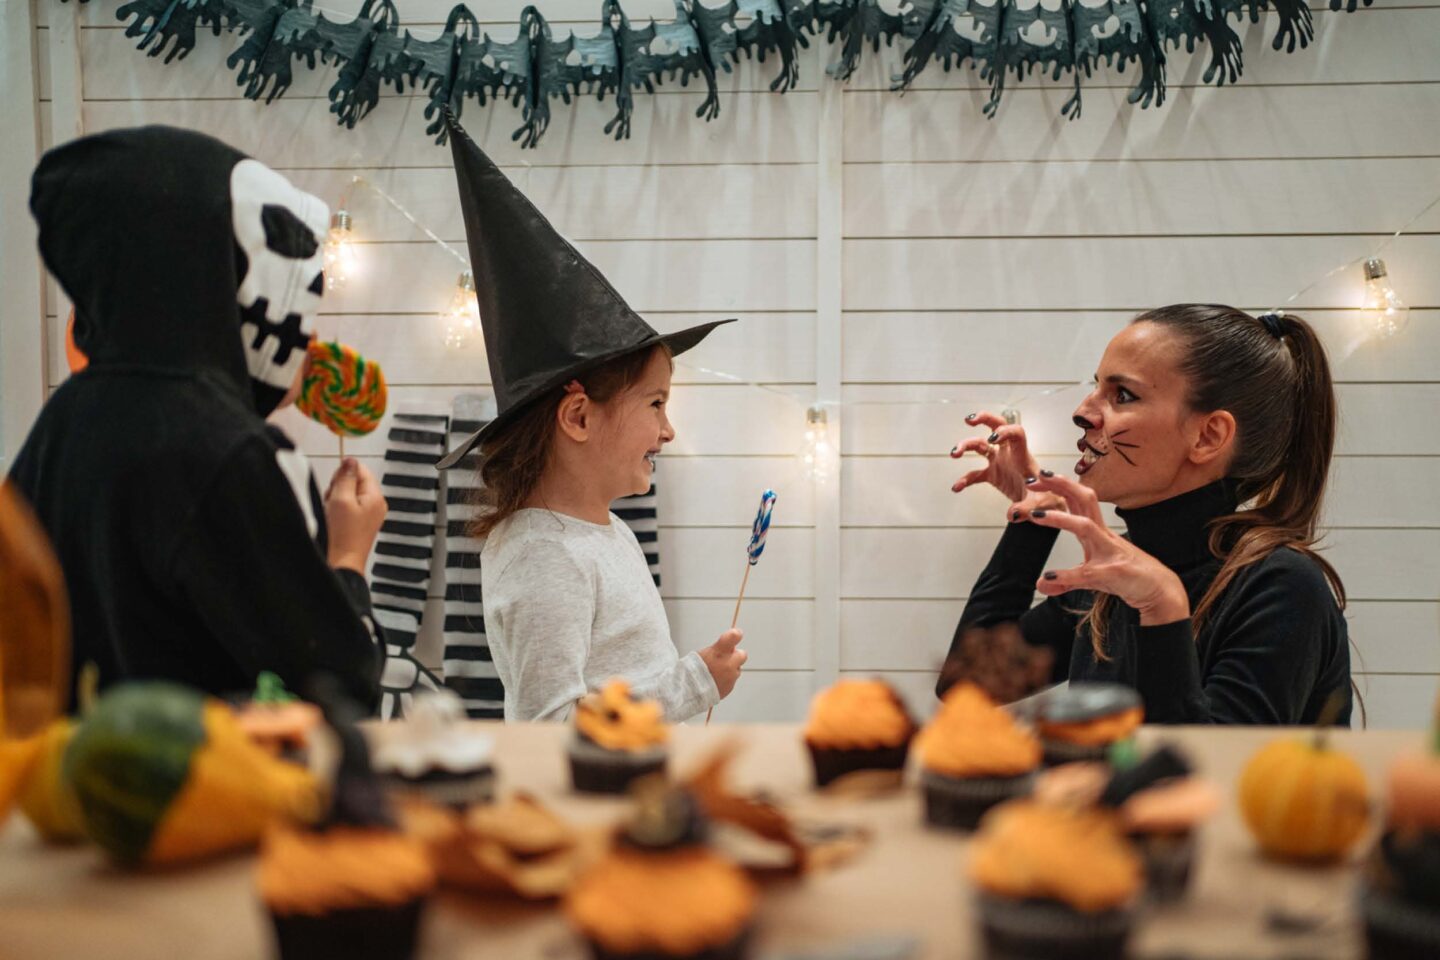 A photo showing one of the Halloween classroom ideas of telling a group scary story. In the photo a boy in a mask and a girl in a witch hat are listening to a grownup woman dressed as a cat tell a scary story.